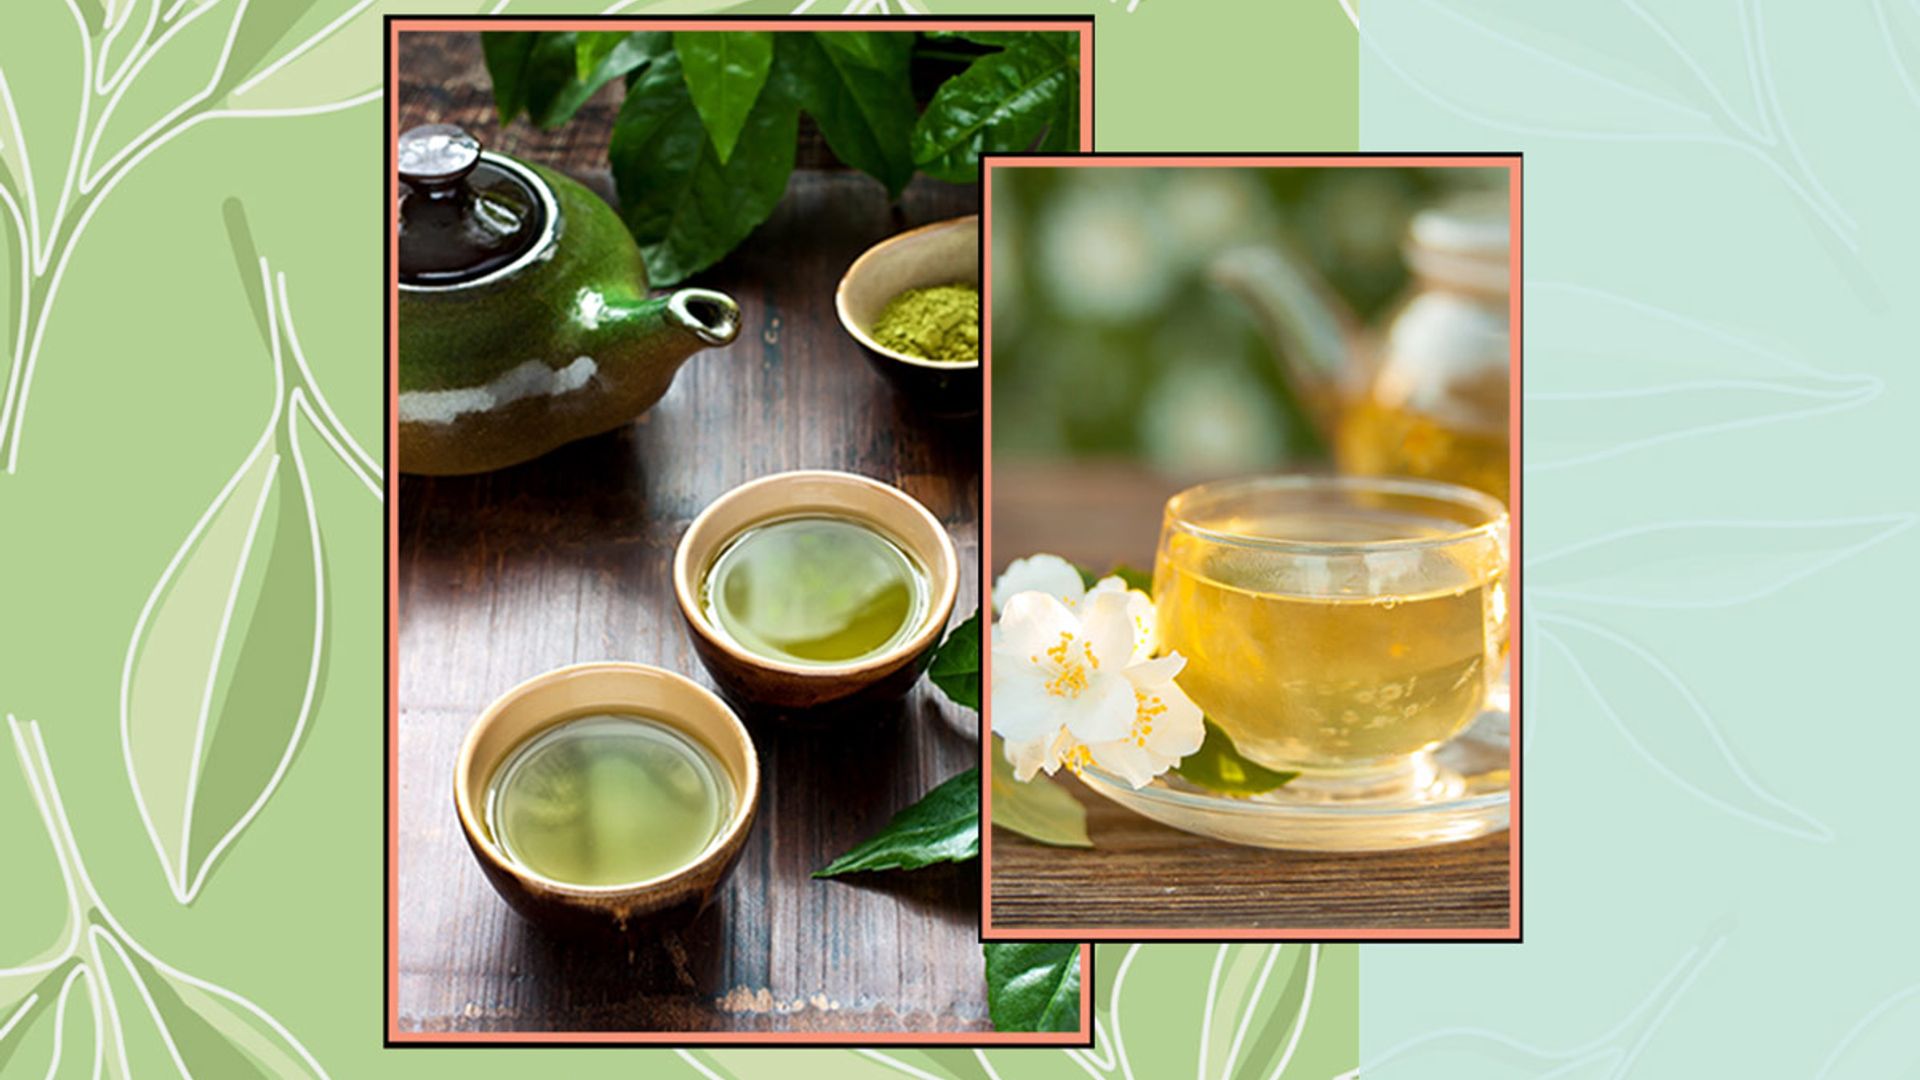 Green tea health benefits - why drinking green tea is good for your mind and body